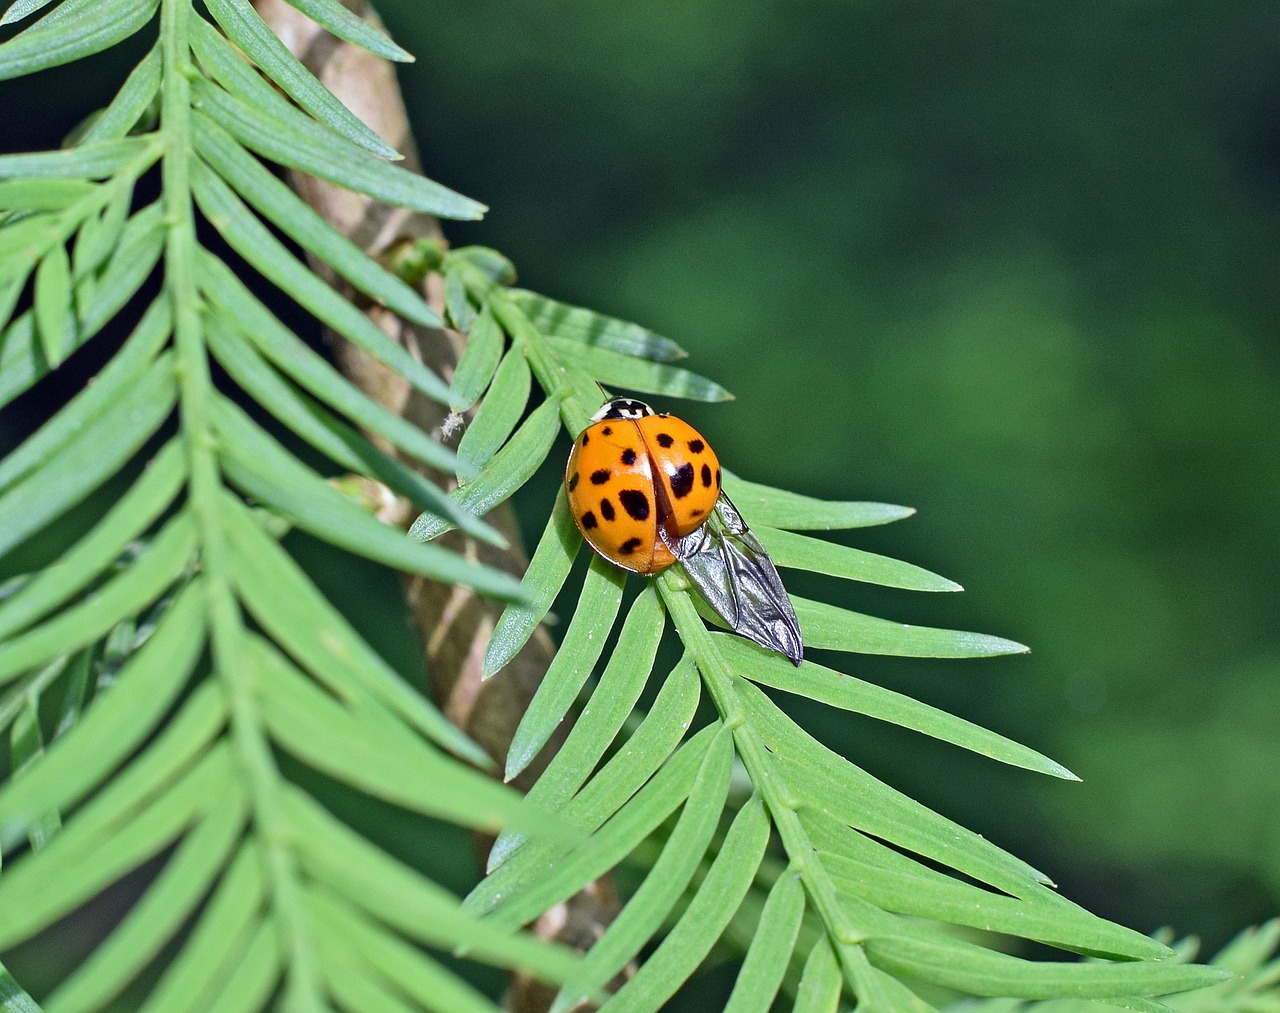 fouteeen-spotted ladybug insect free photo